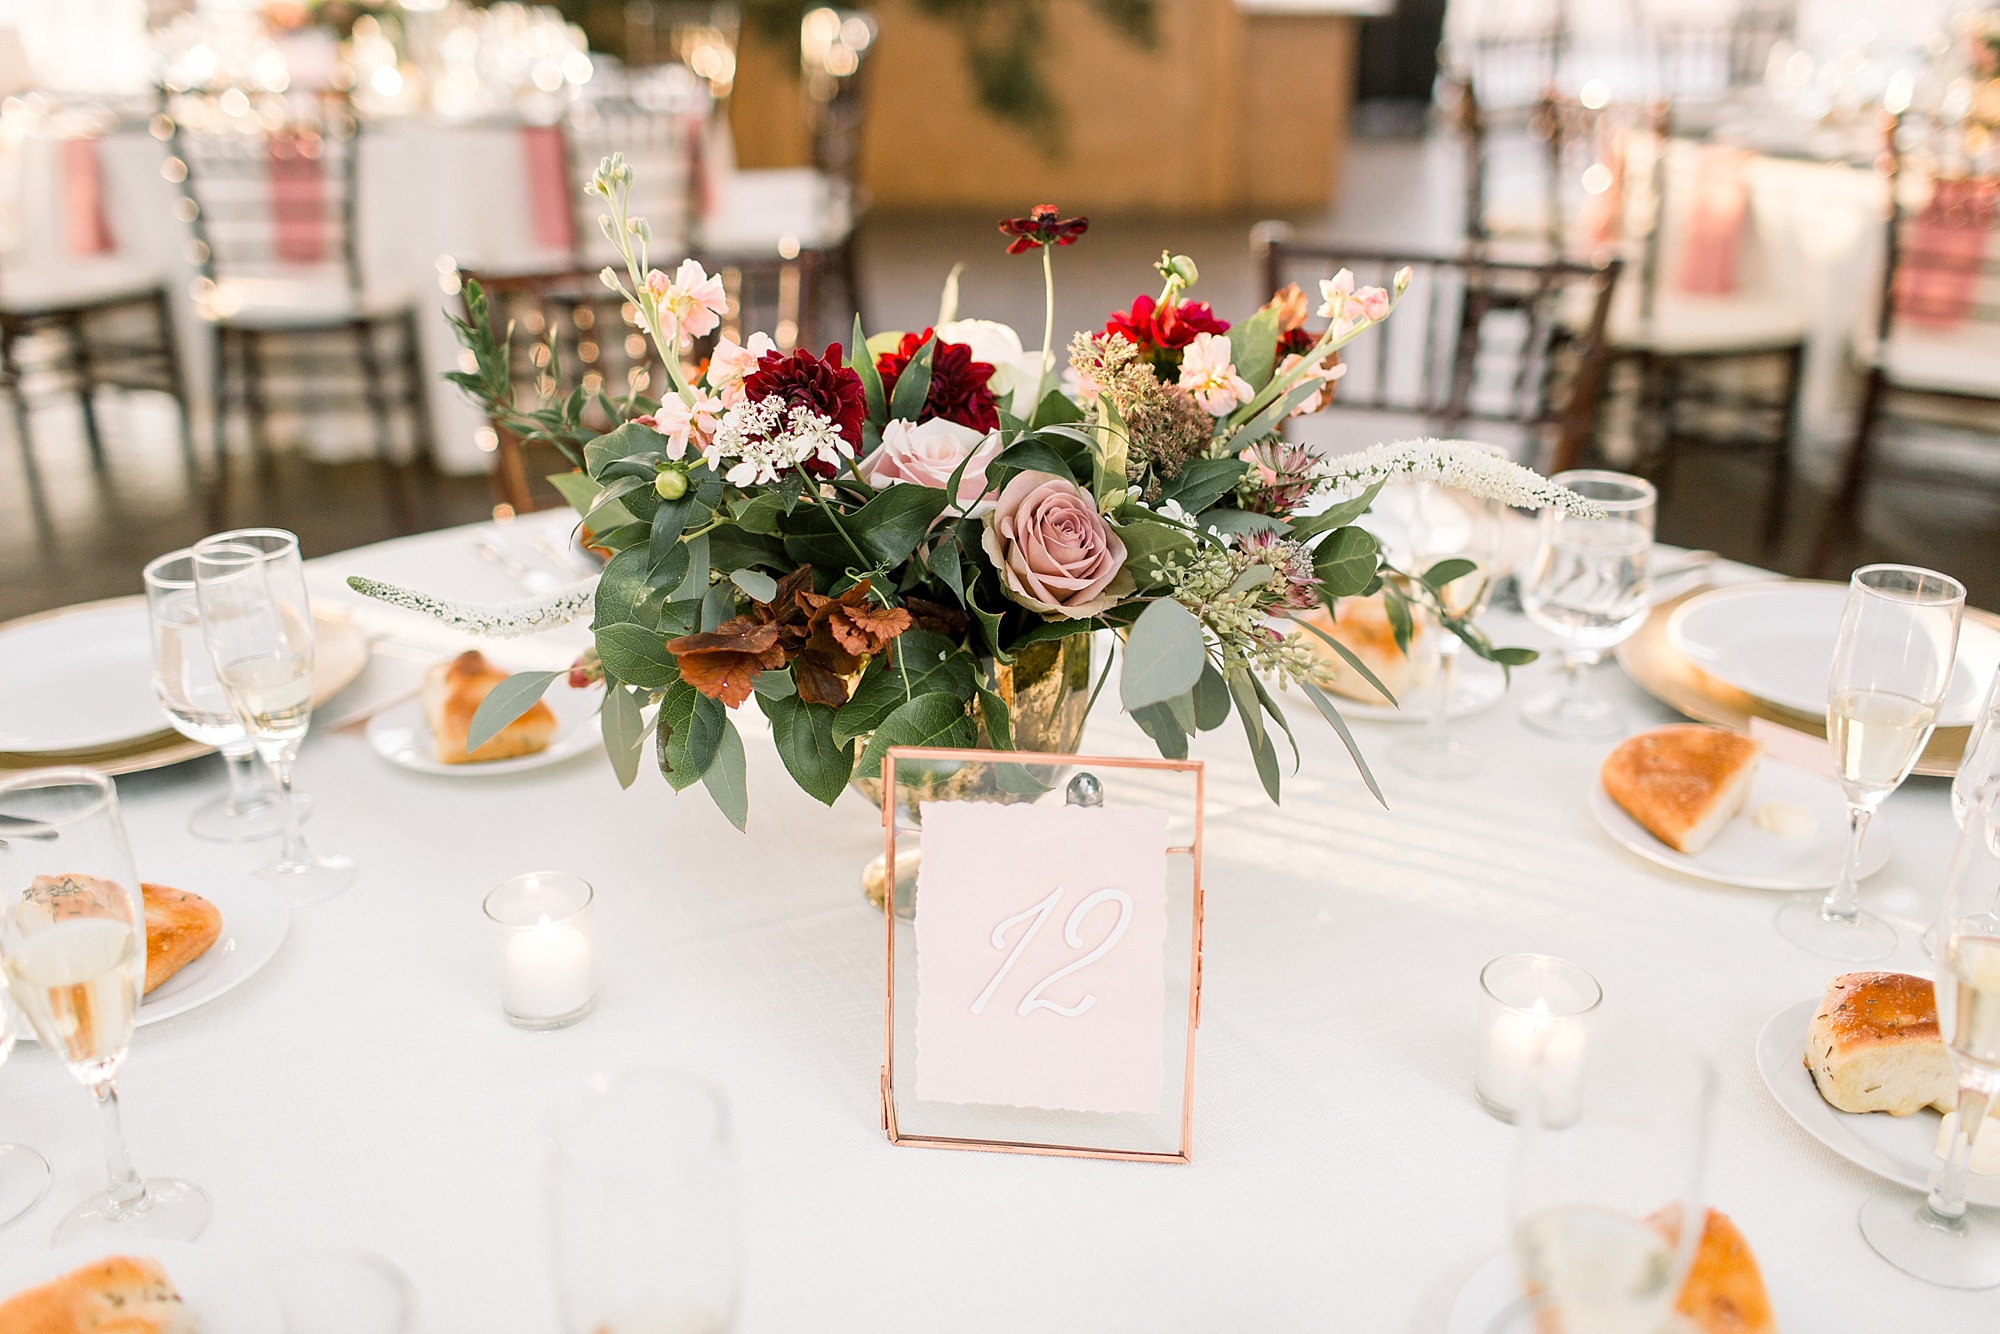 Tyler Gardens wedding reception with pink and red floral bouquet 